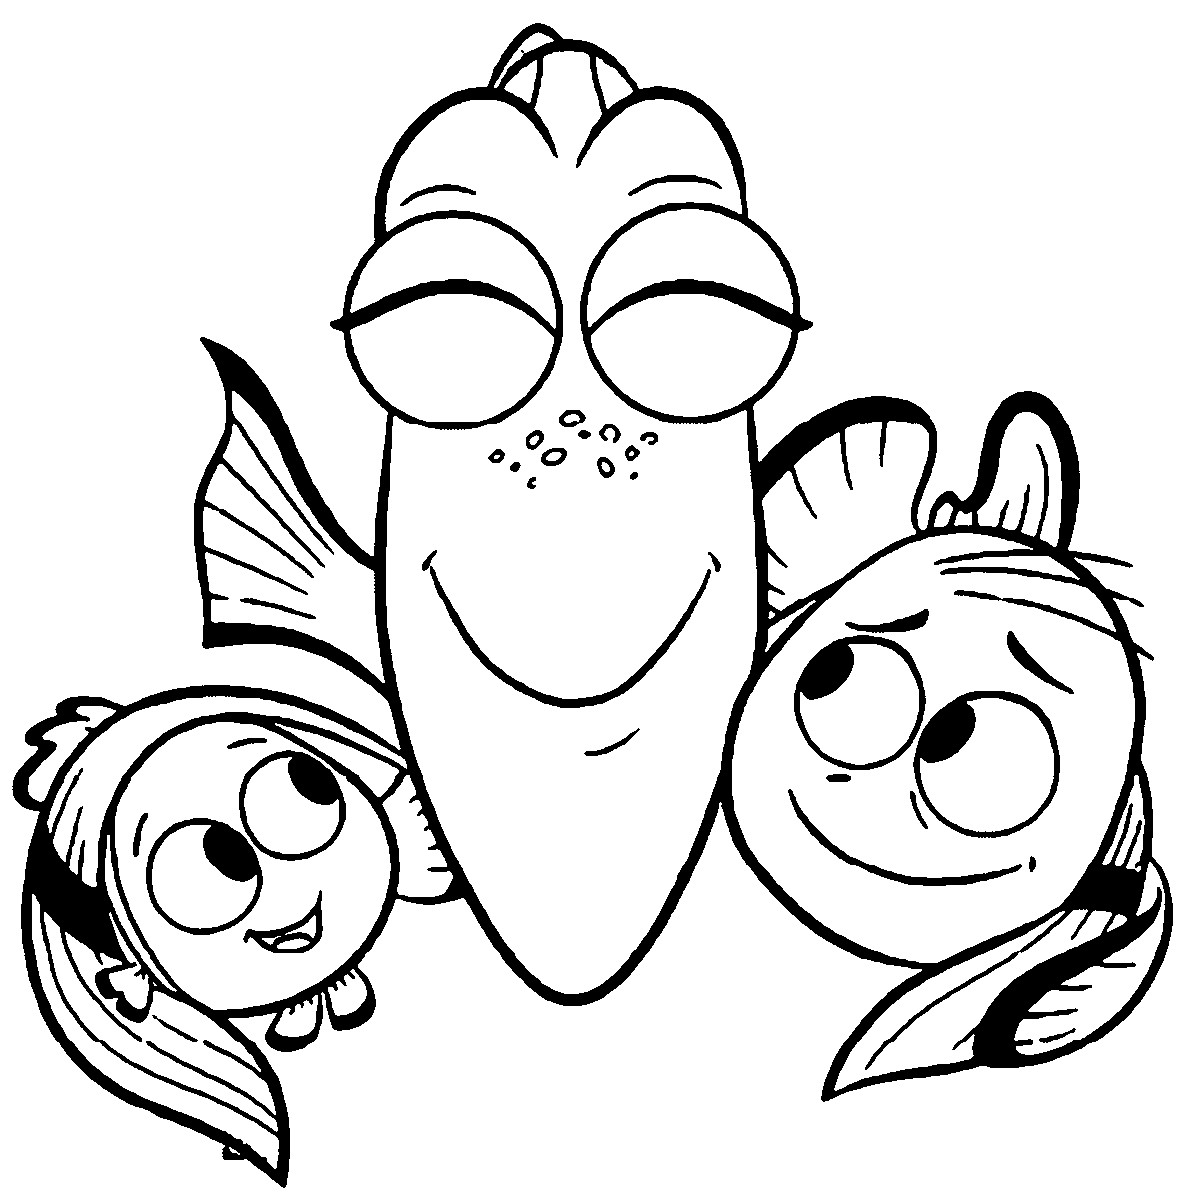 Coloring Pages For Kides
 Dory Coloring Pages Best Coloring Pages For Kids